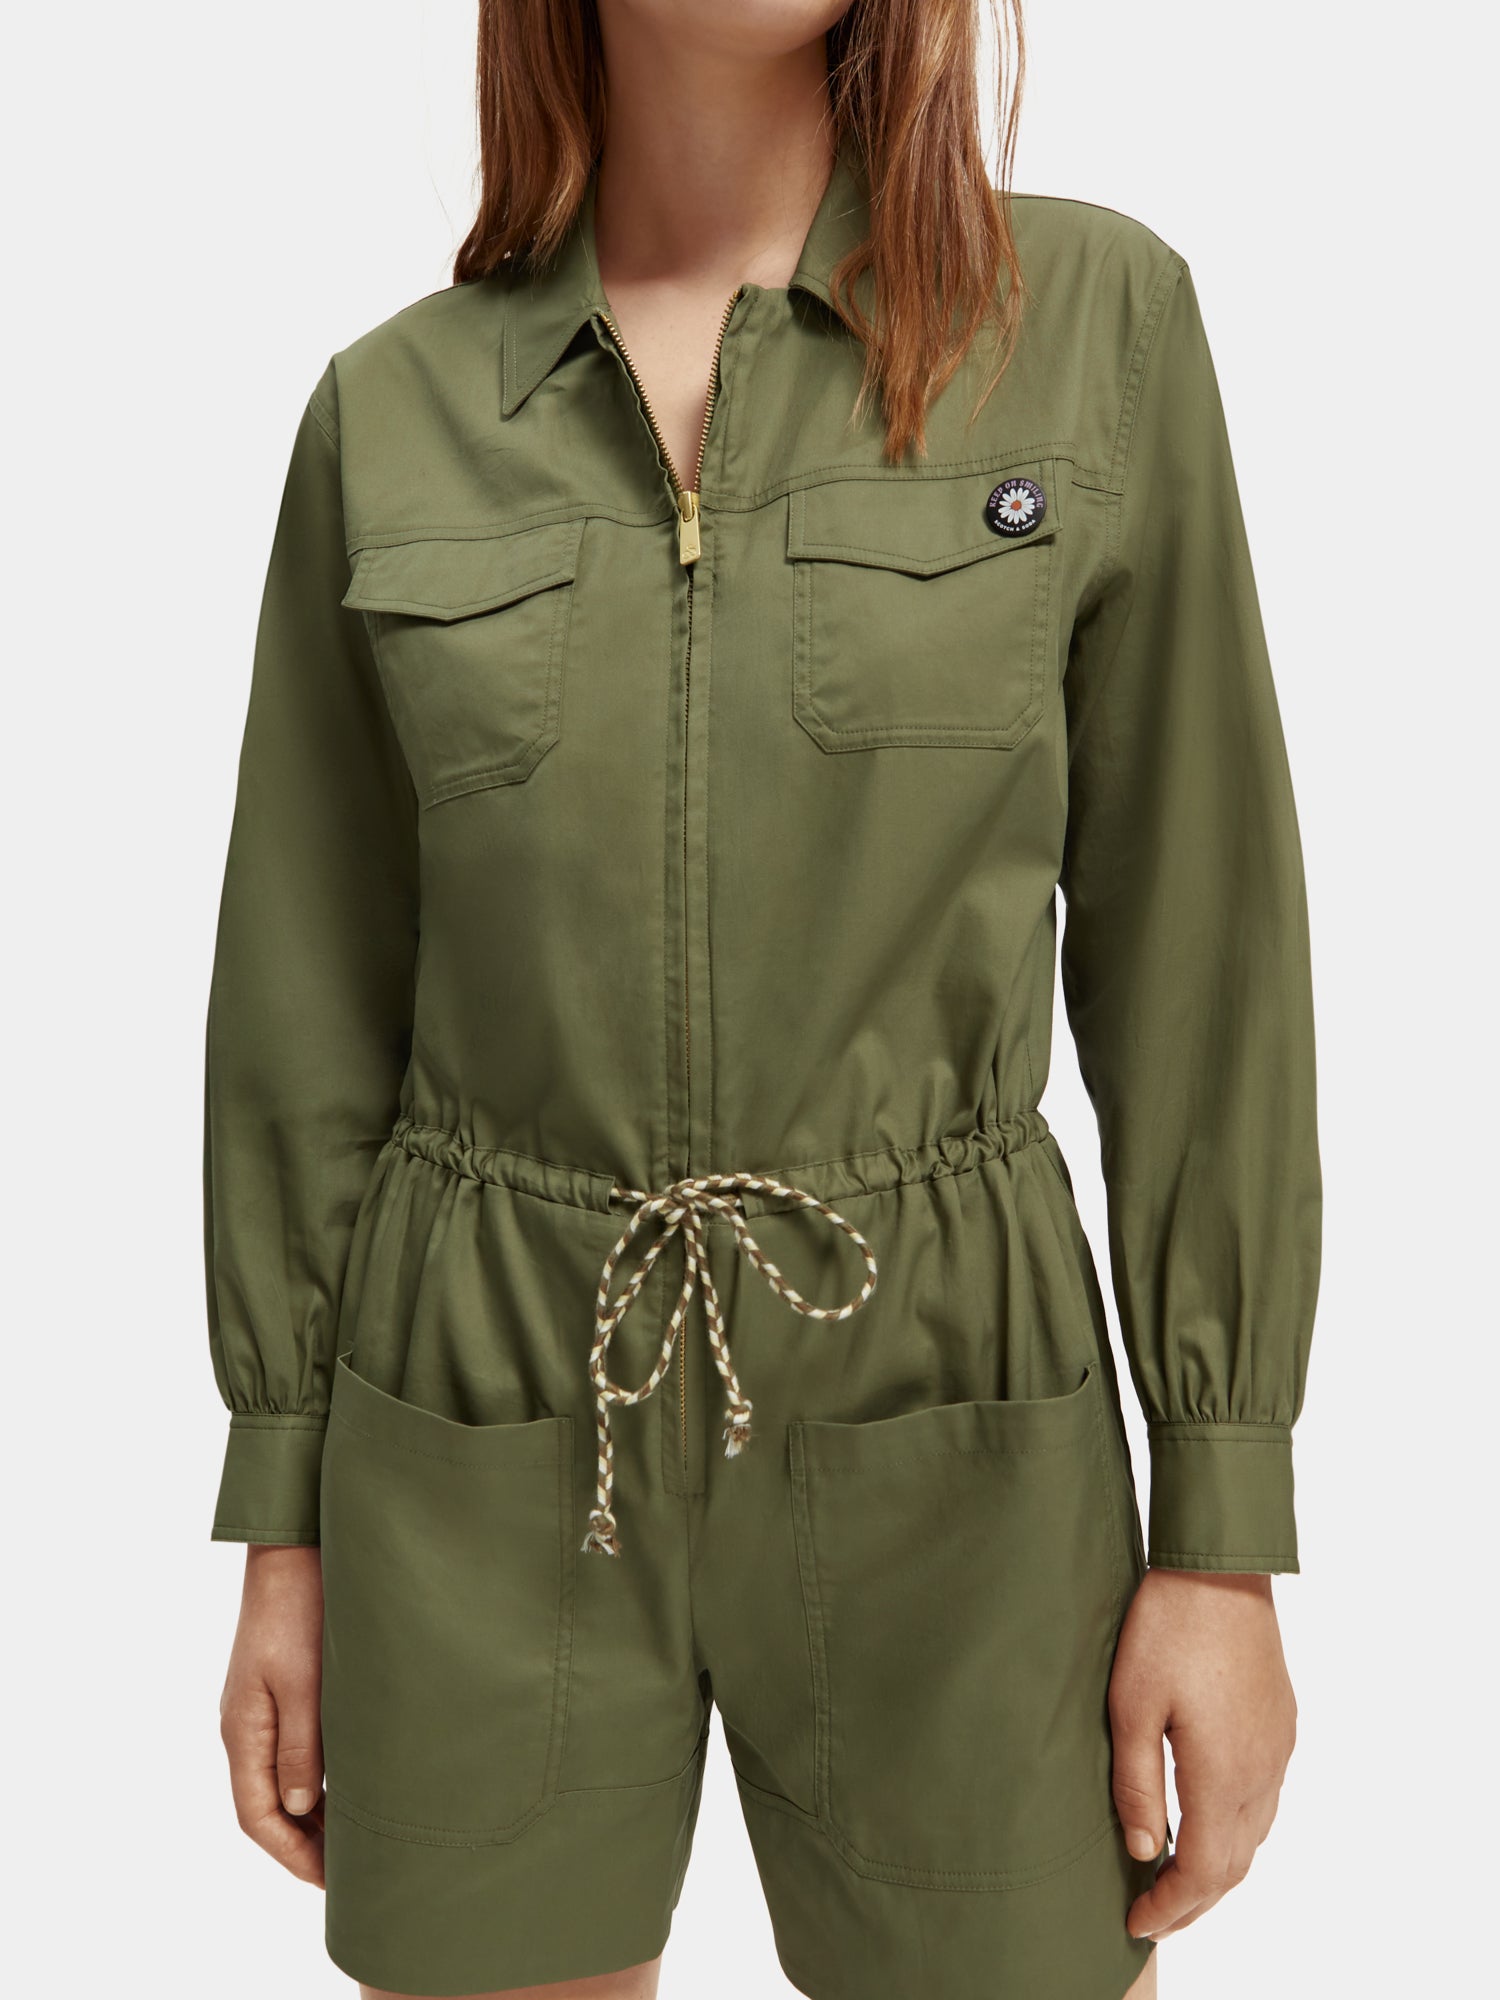 Military playsuit - Olive Green